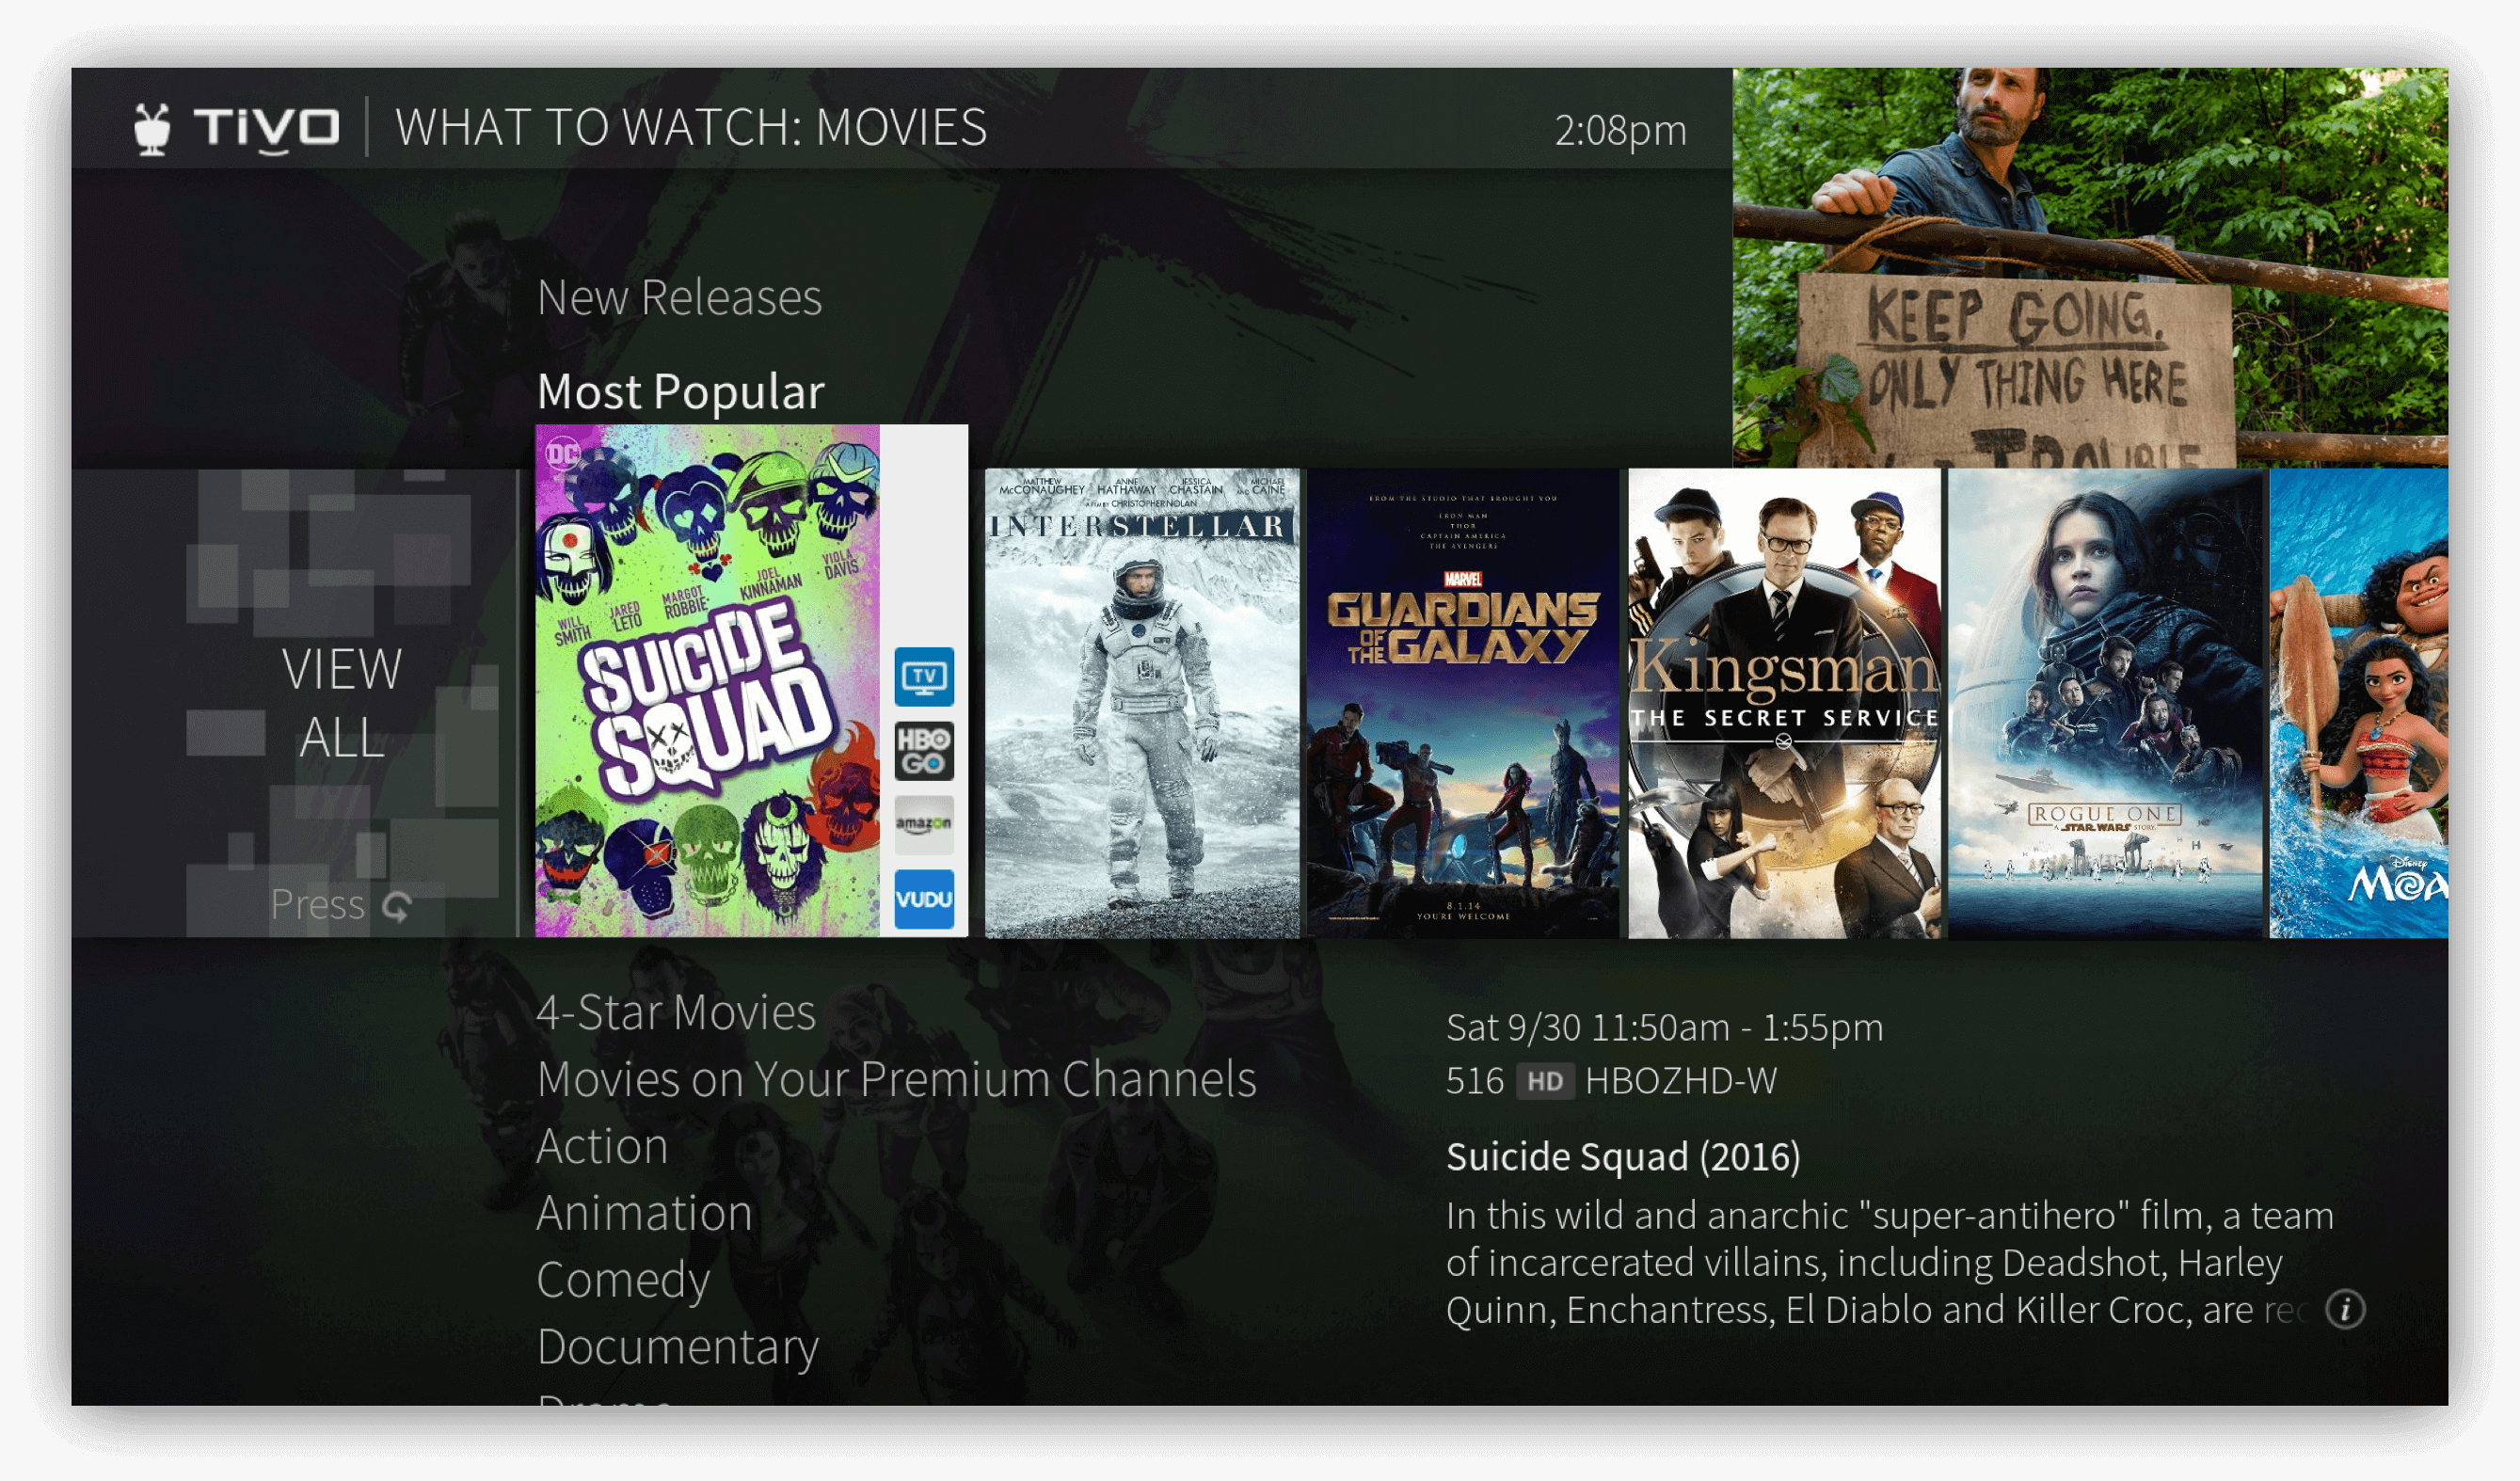 TiVo’s What to Watch section, a helpful tool that can show you content based on your past viewing habits.